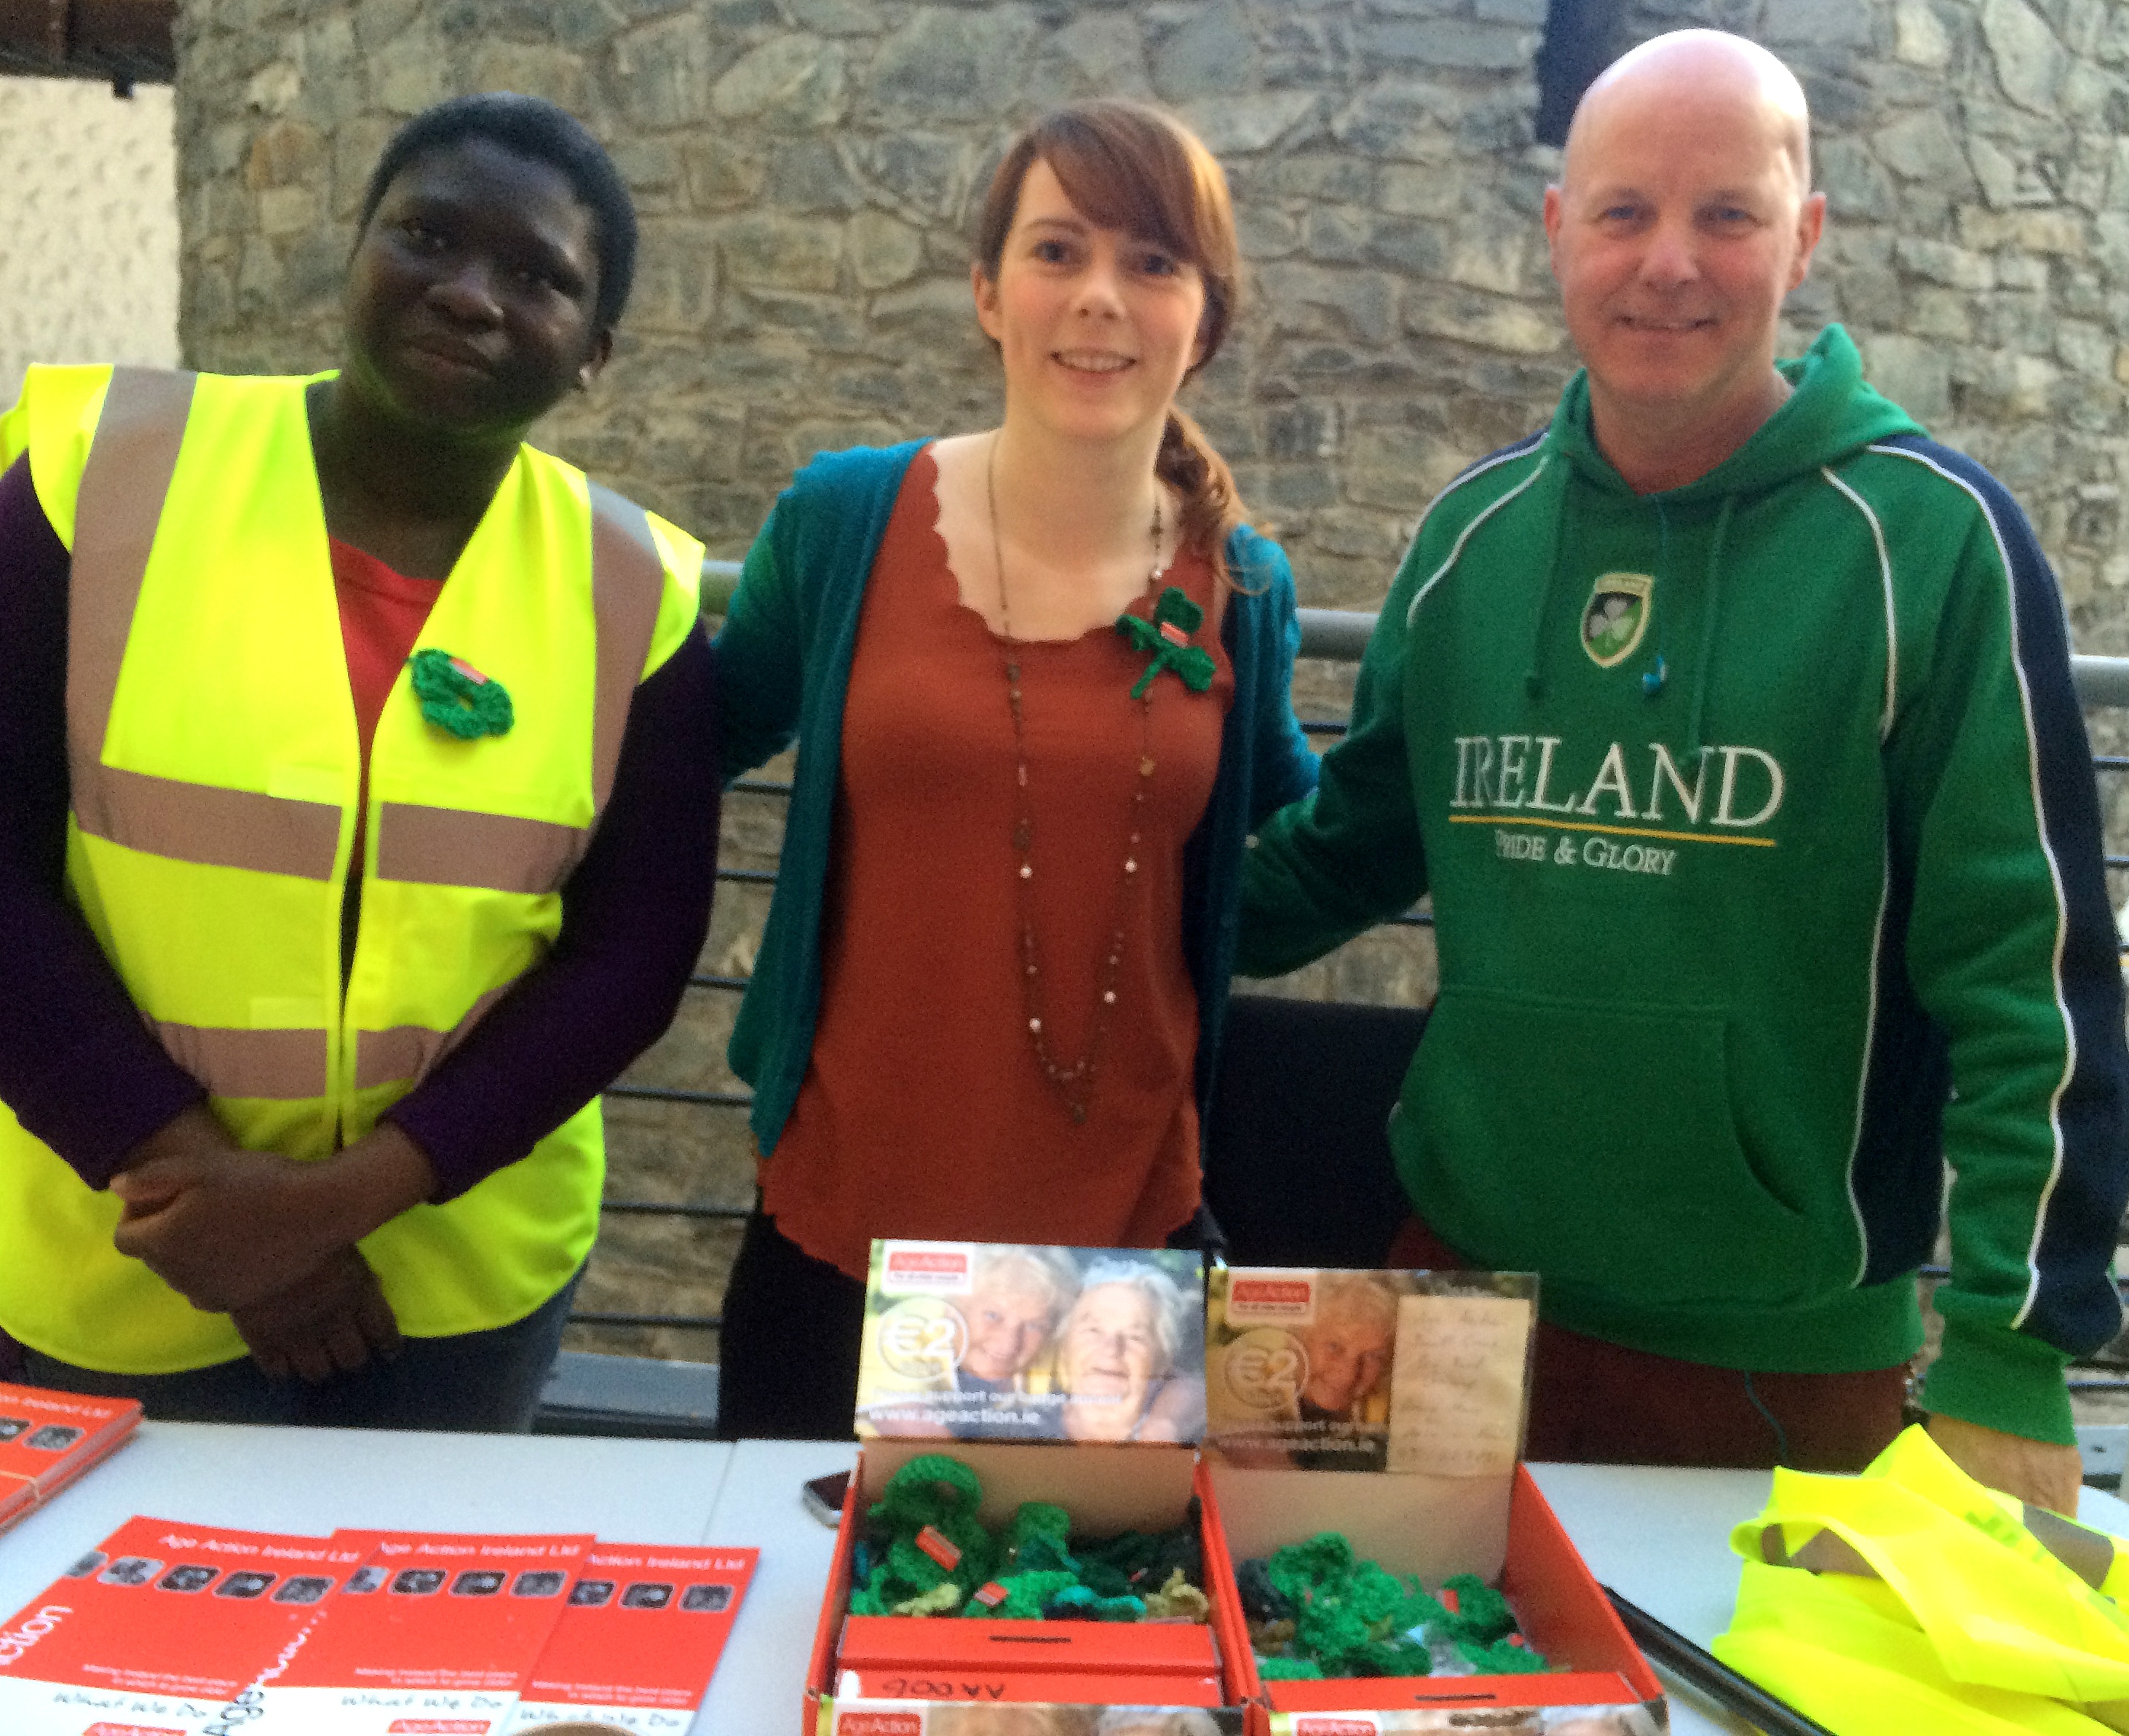 Age Action St Patrick's collection in Galway